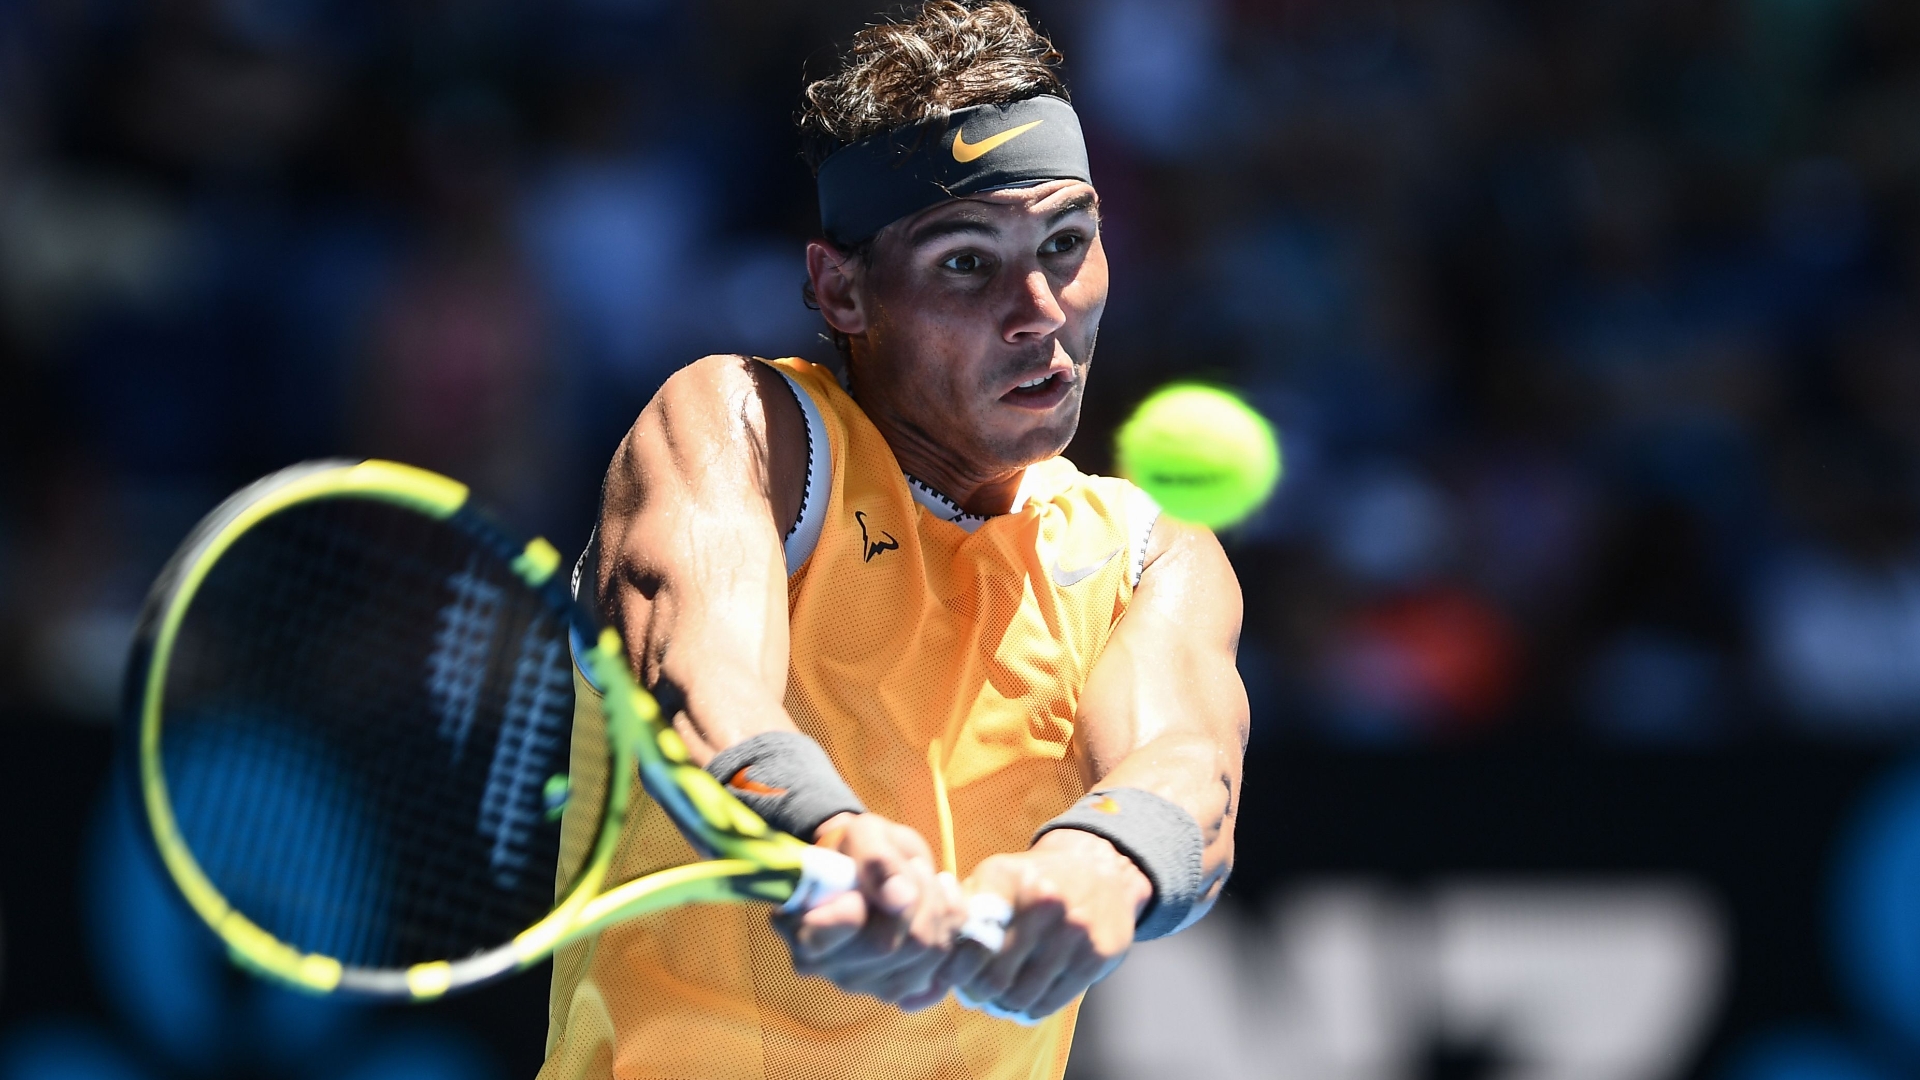 Nadal smashes backhand winner to defeat Duckworth - Stream the Video